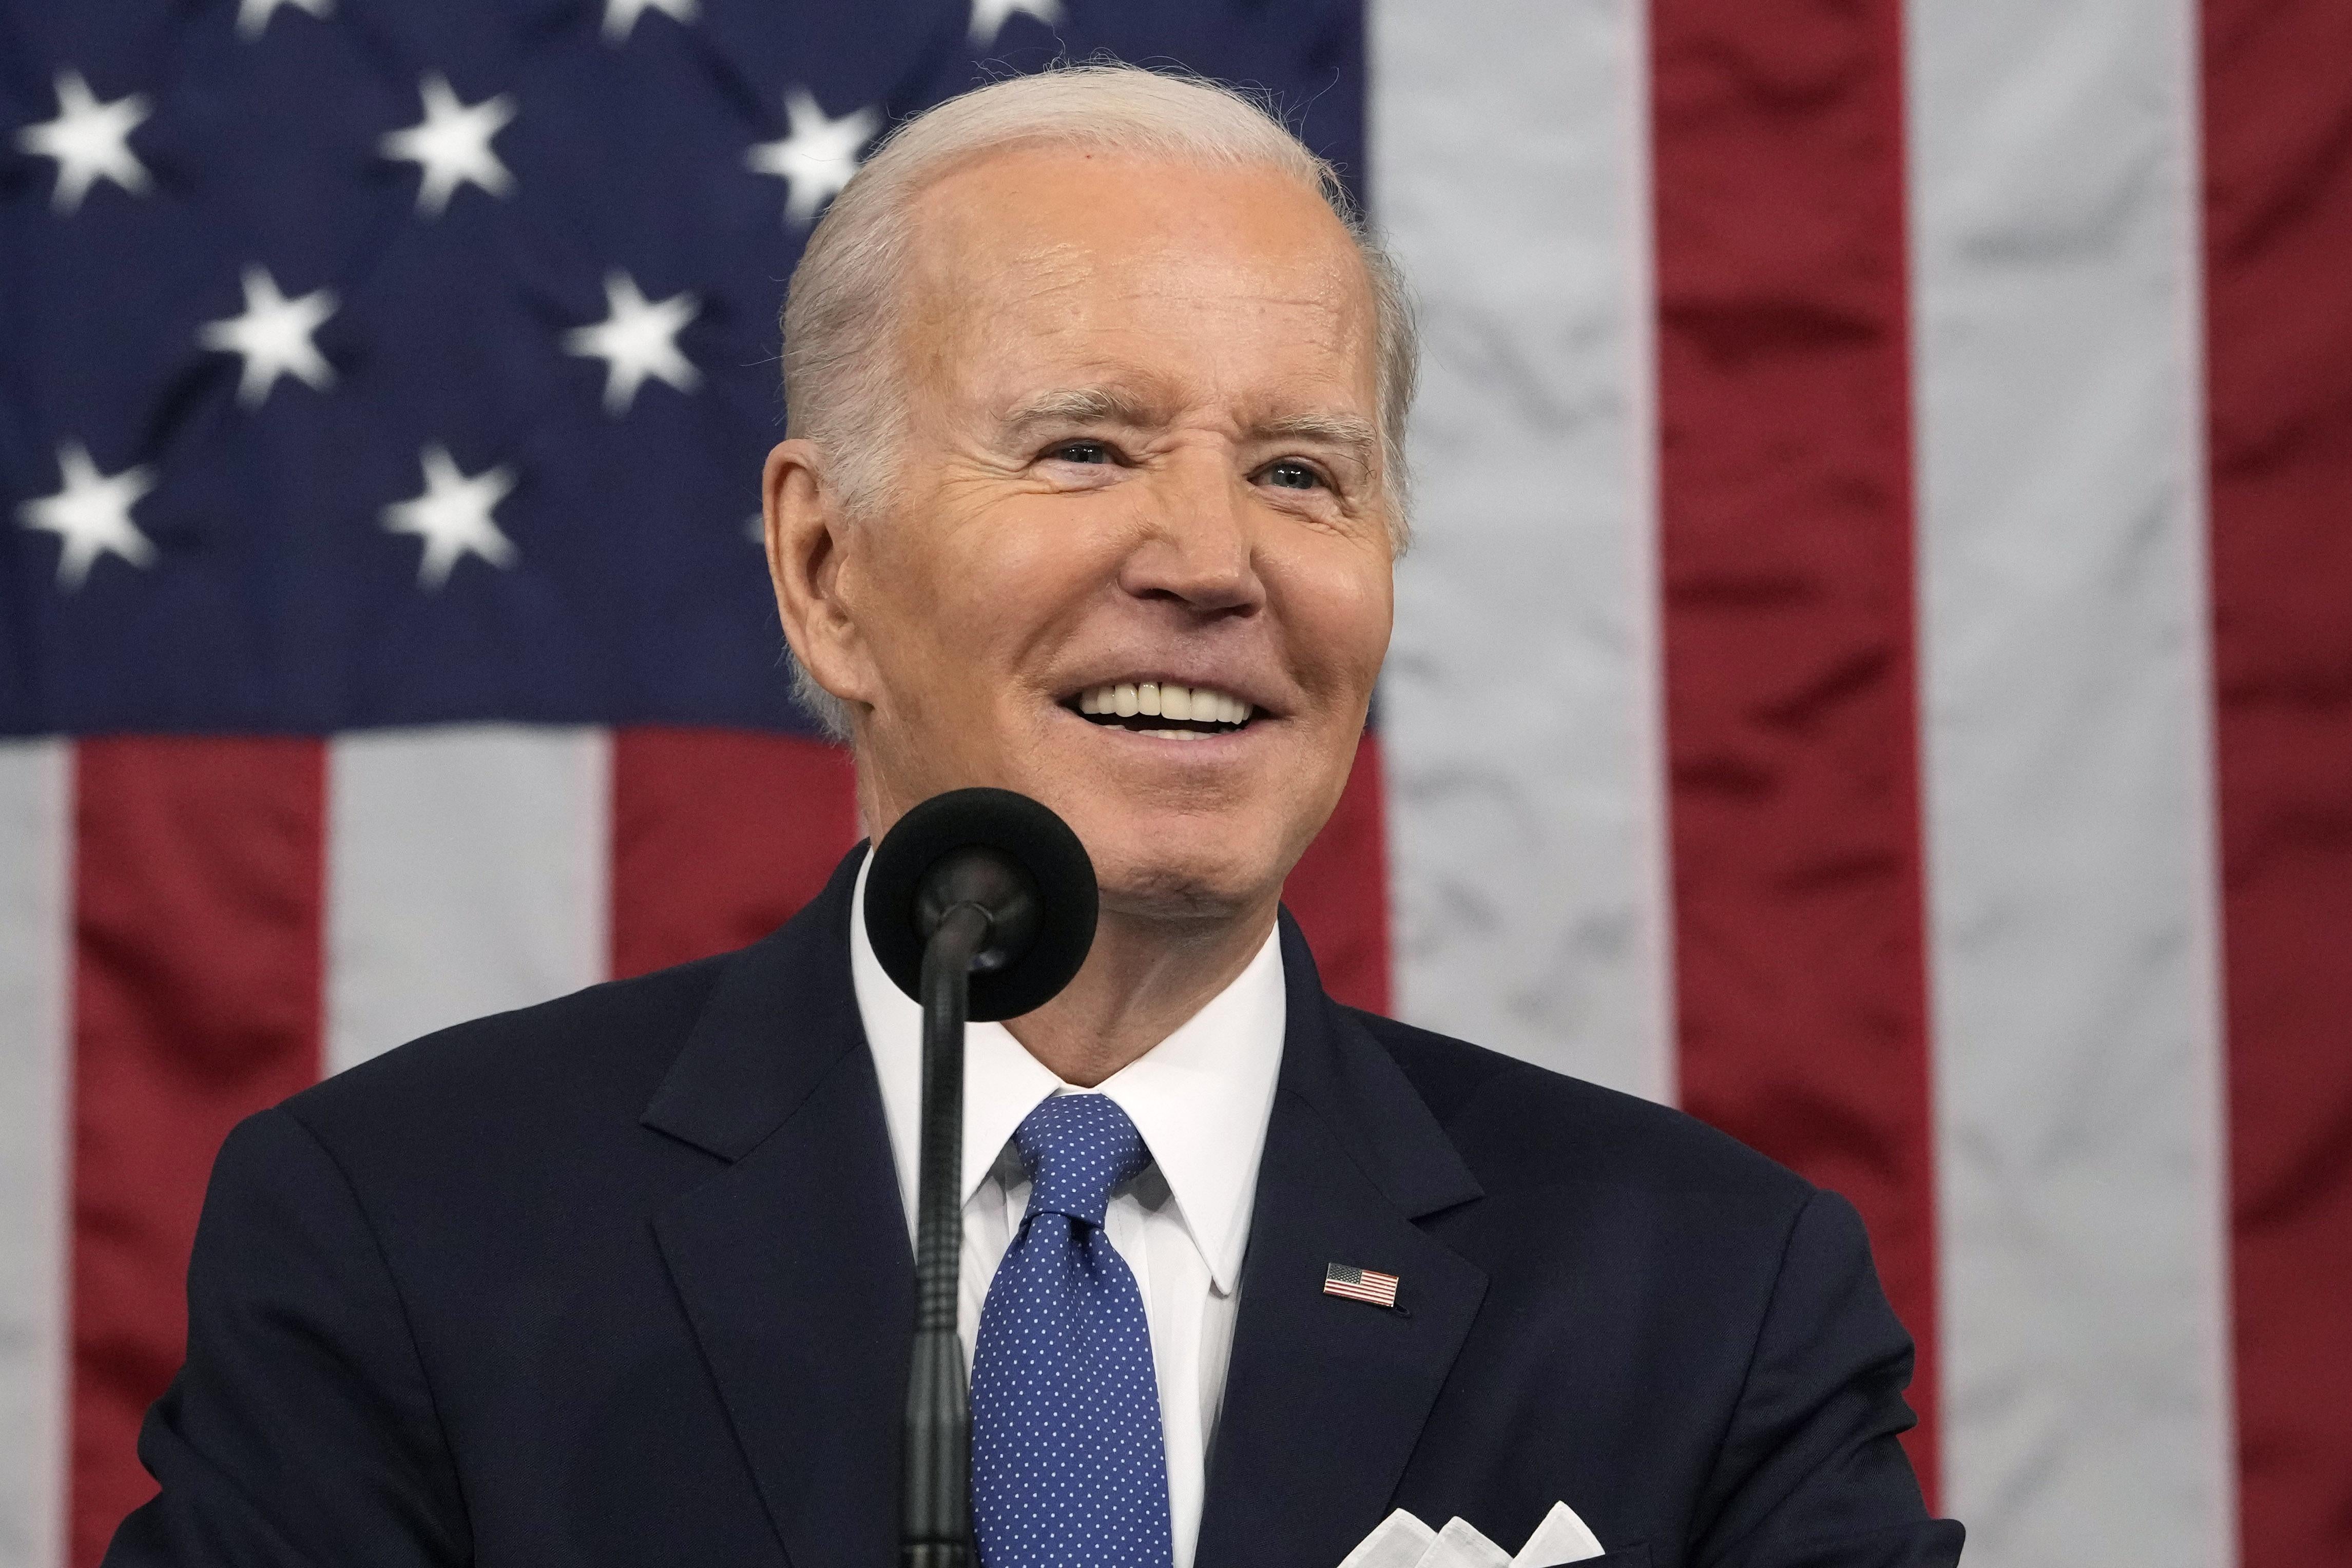 Joe Biden smiling while delivering the State of the Union, with a large American flag draped in the background